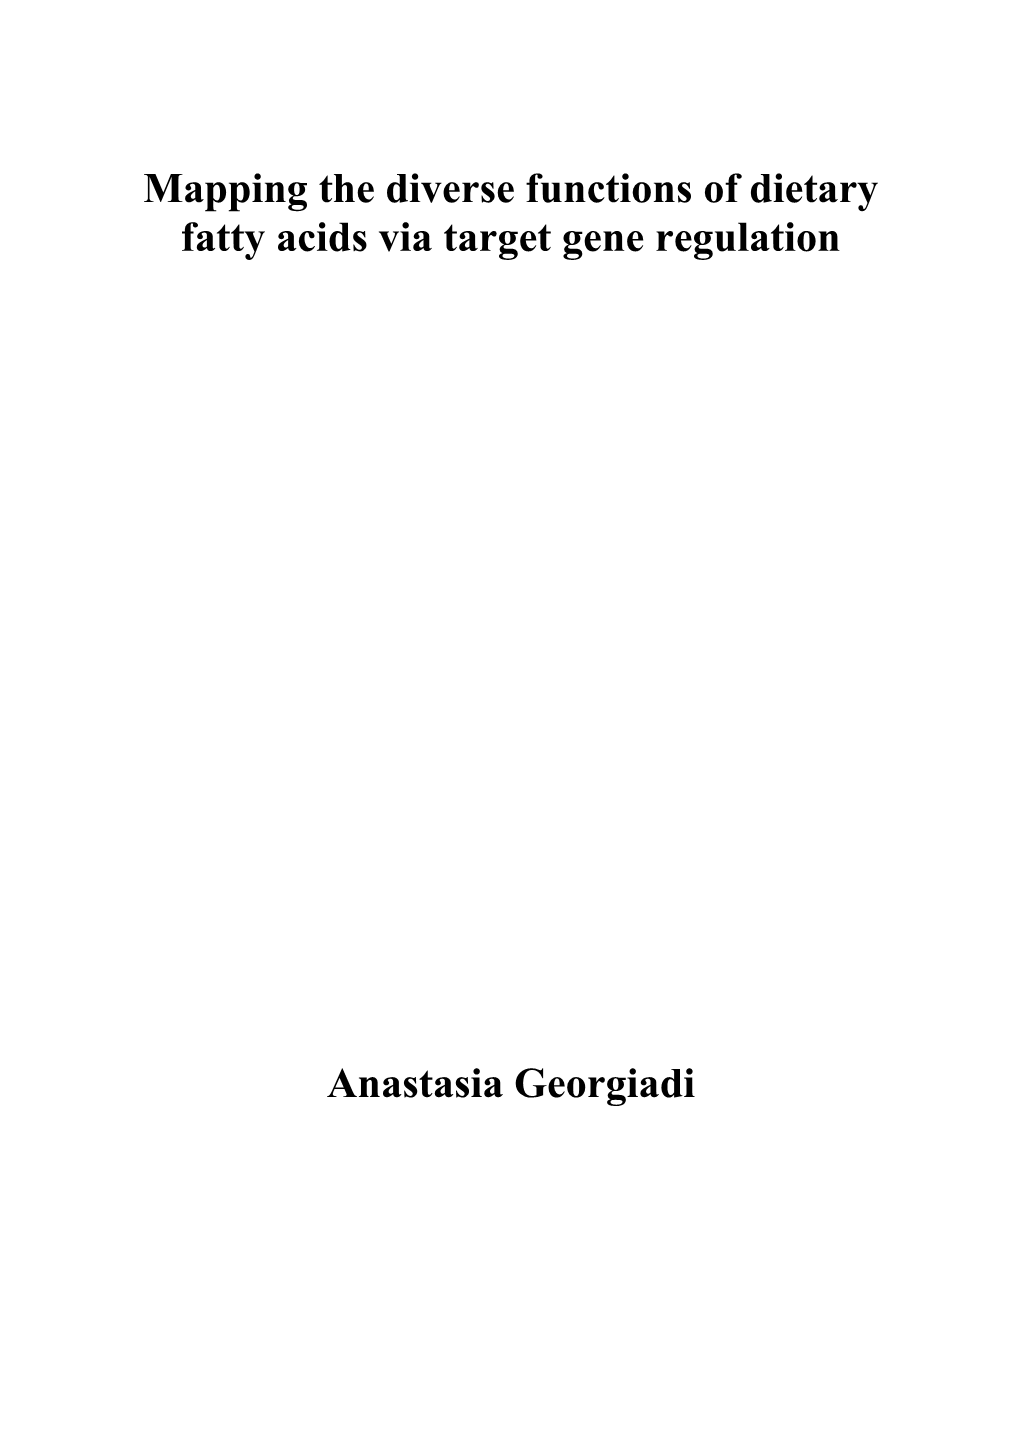 Mapping the Diverse Functions of Dietary Fatty Acids Via Target Gene Regulation